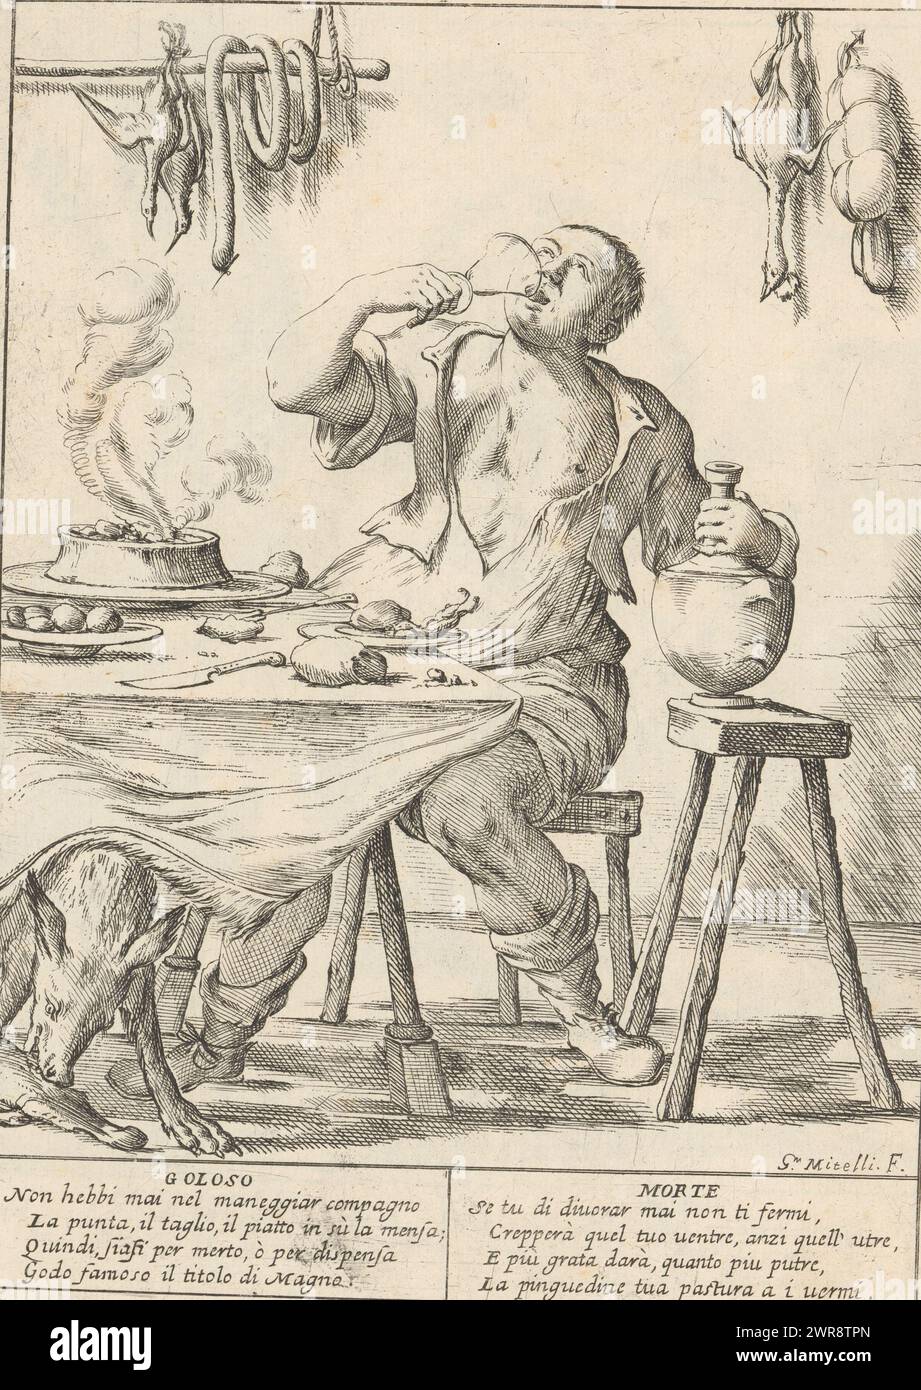 The glutton, Le Ventiquattr'Hore dell'humana felicità (series title on object), The twenty-four hours of human happiness (series title), A greedy man or glutton (Goloso) sitting at a table overloaded with food drinks from a glass. Sausages and poultry hang on the wall. A pig is gnawing on a piece of meat under the table. With two four-line verses in Italian. Numbered top right: 5. Title print for the series 'The twenty-four hours of human happiness'., print maker: Giuseppe Maria Mitelli, after own design by: Giuseppe Maria Mitelli, 1675, paper, etching, engraving Stock Photo